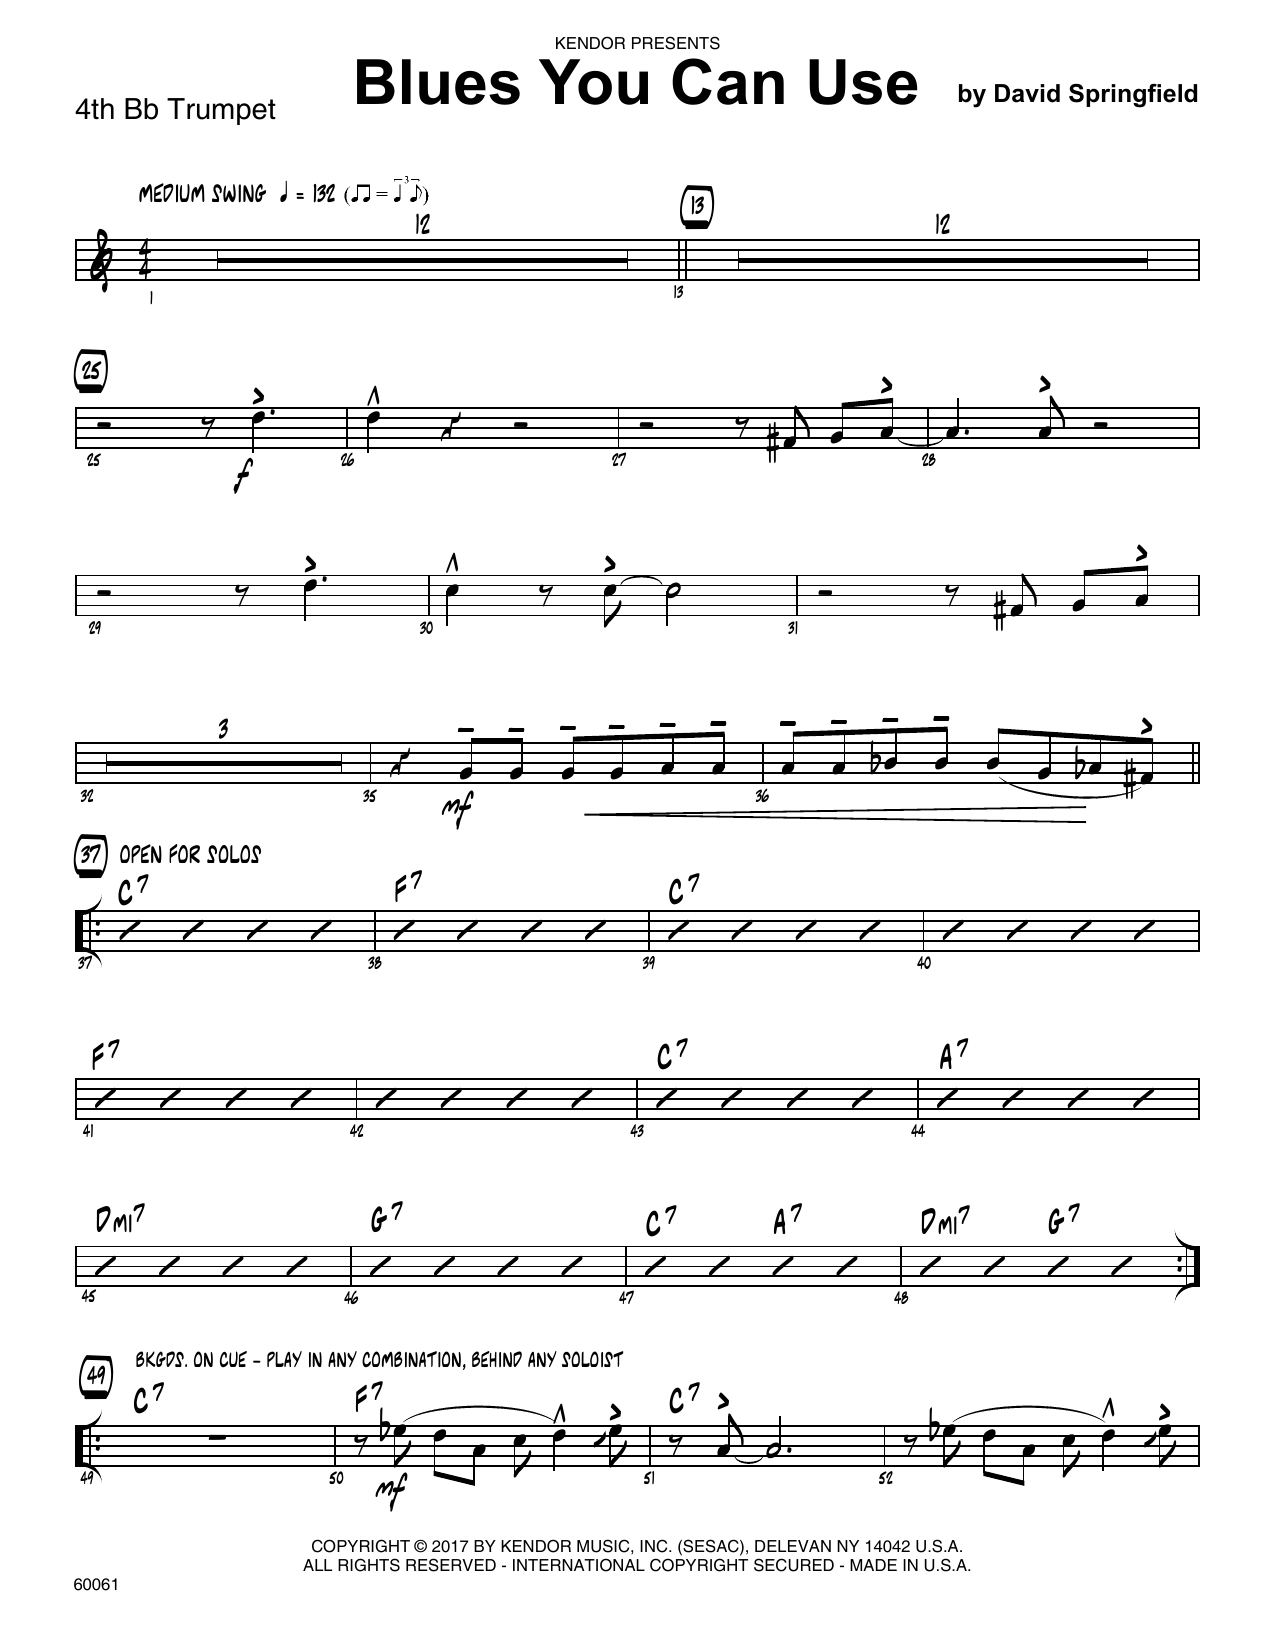 Download David Springfield Blues You Can Use - 4th Bb Trumpet Sheet Music